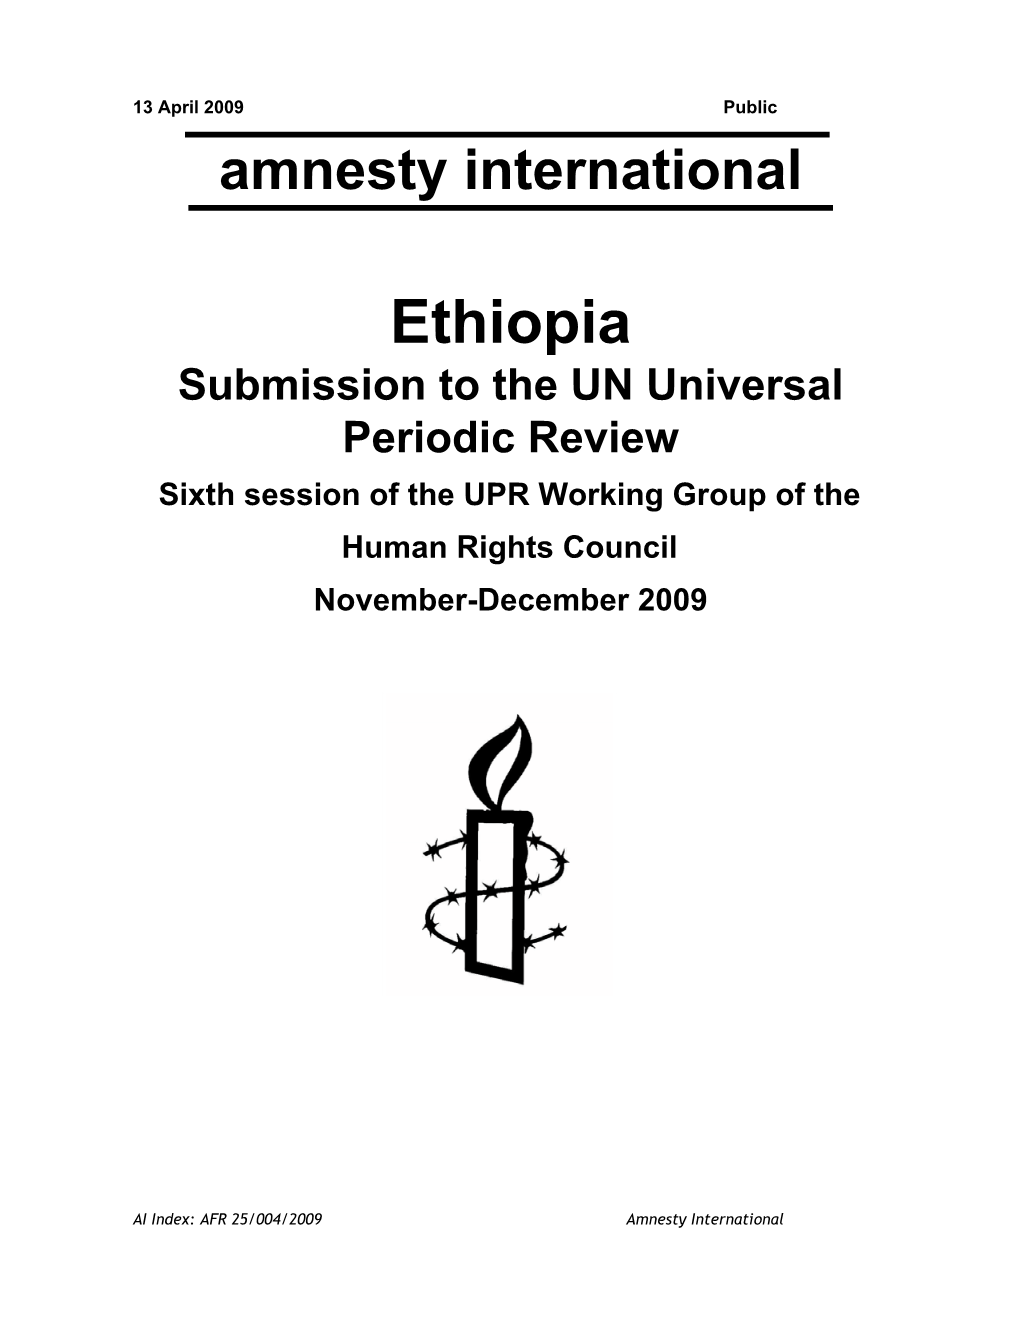 Ethiopia Amnesty International Submission to the UN Universal Periodic Review Sixth Session of the UPR Working Group, November-December 2009